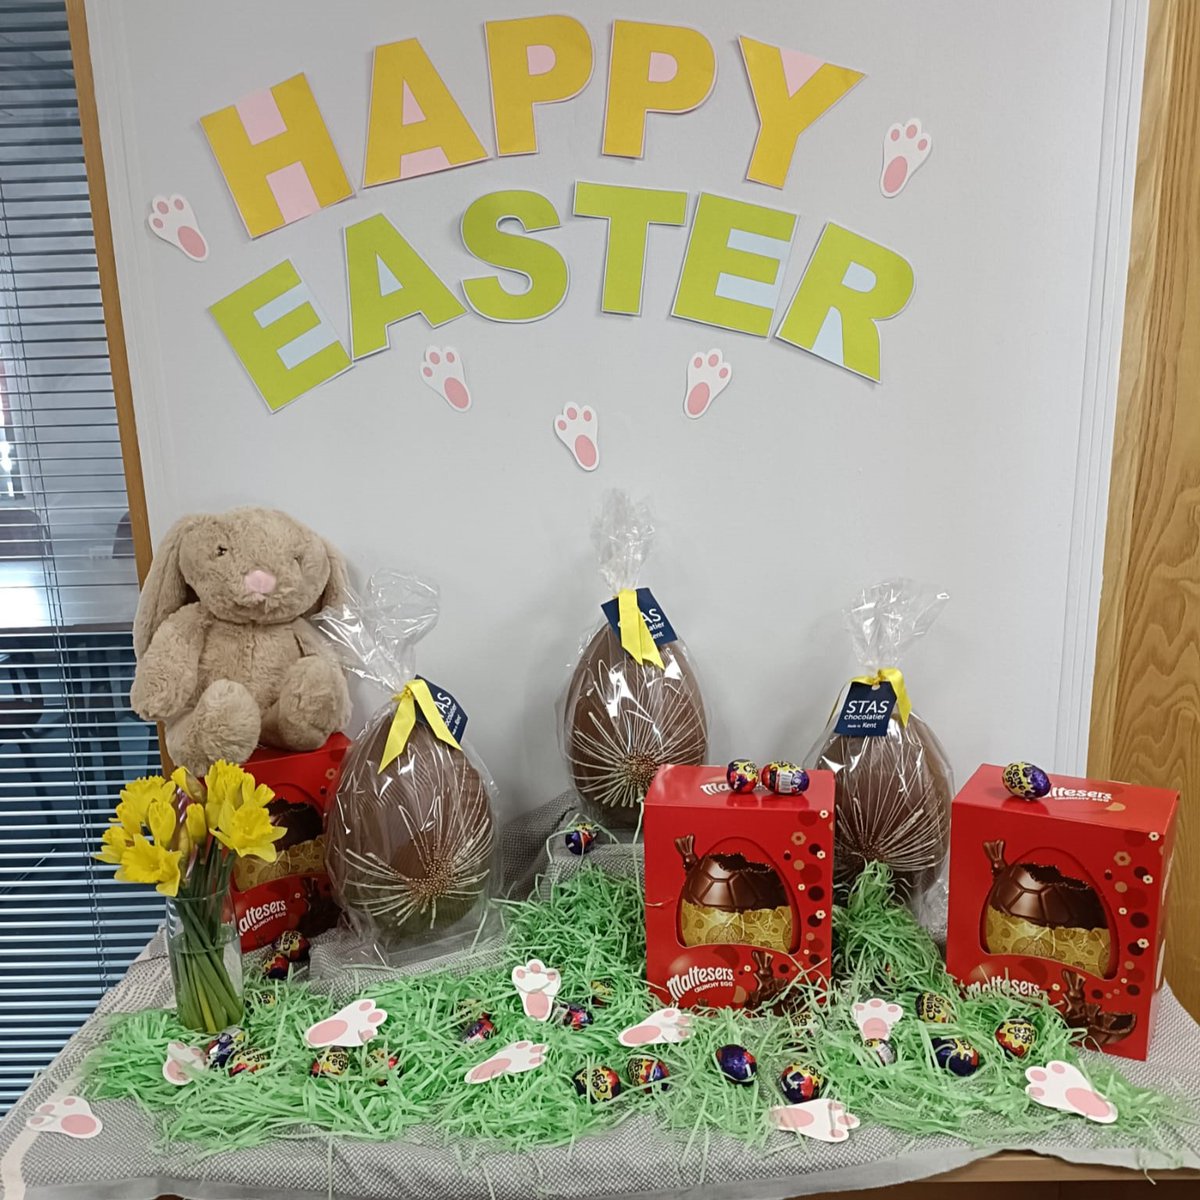 Big thanks to Elaine and the team at Tradeteam for their foodbank donation from proceeds raised during their Easter Raffle! It is really appreciated and will help our foodbank so much. #YMCA #YMCABurton #Charity #Foodbank